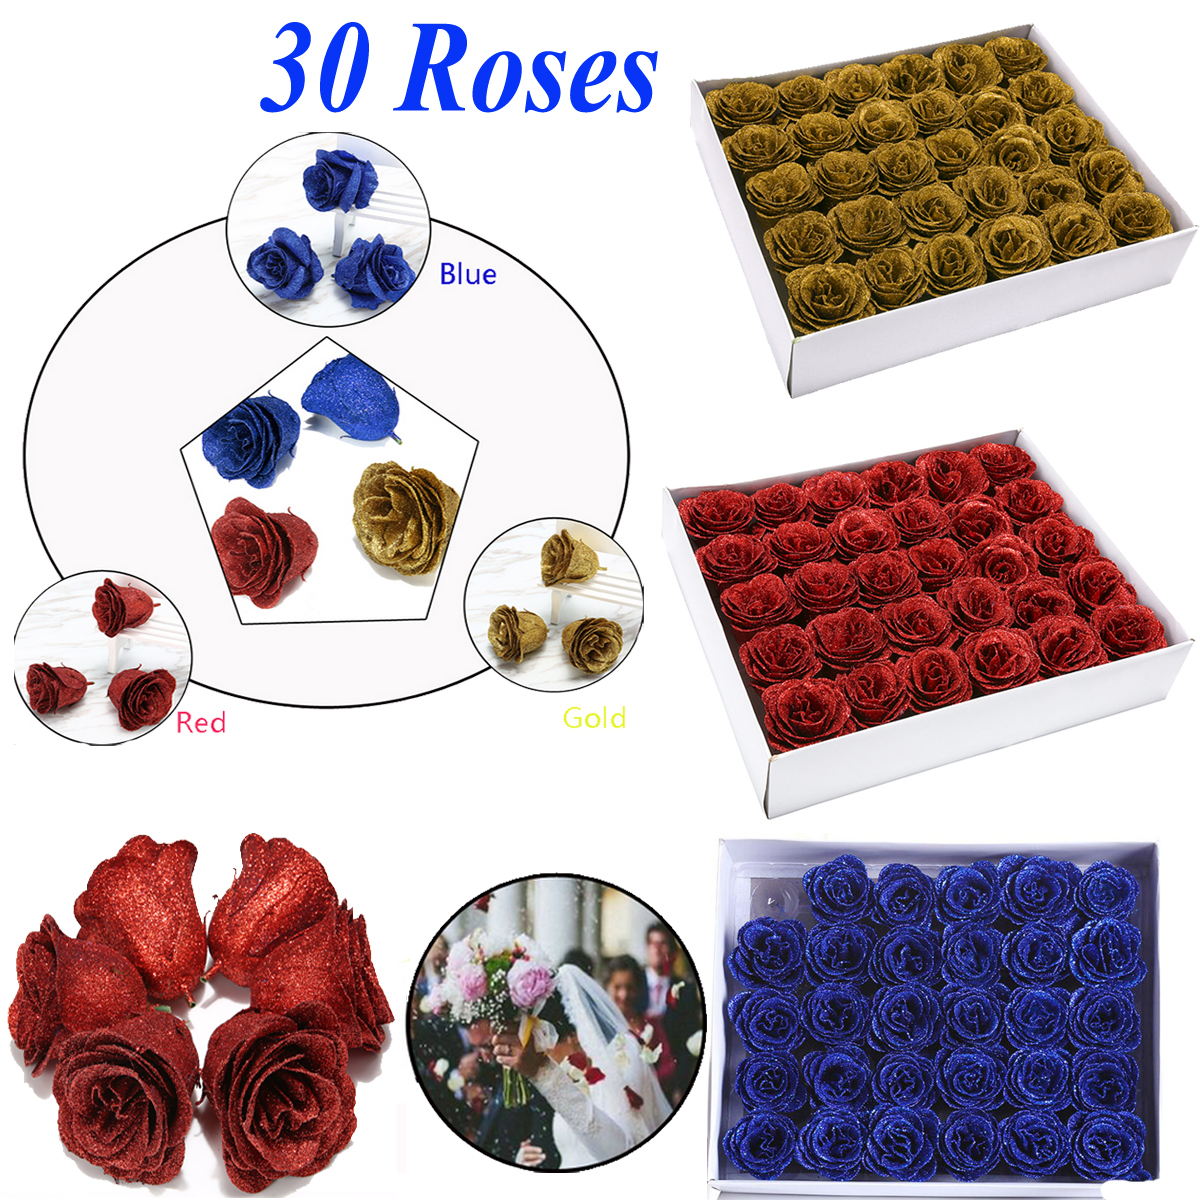 30PCS-Artificial-Rose-Flower-Crystal-Gold-Powder-Valentines-Day-Party-Gift-Decorations-1600349-2